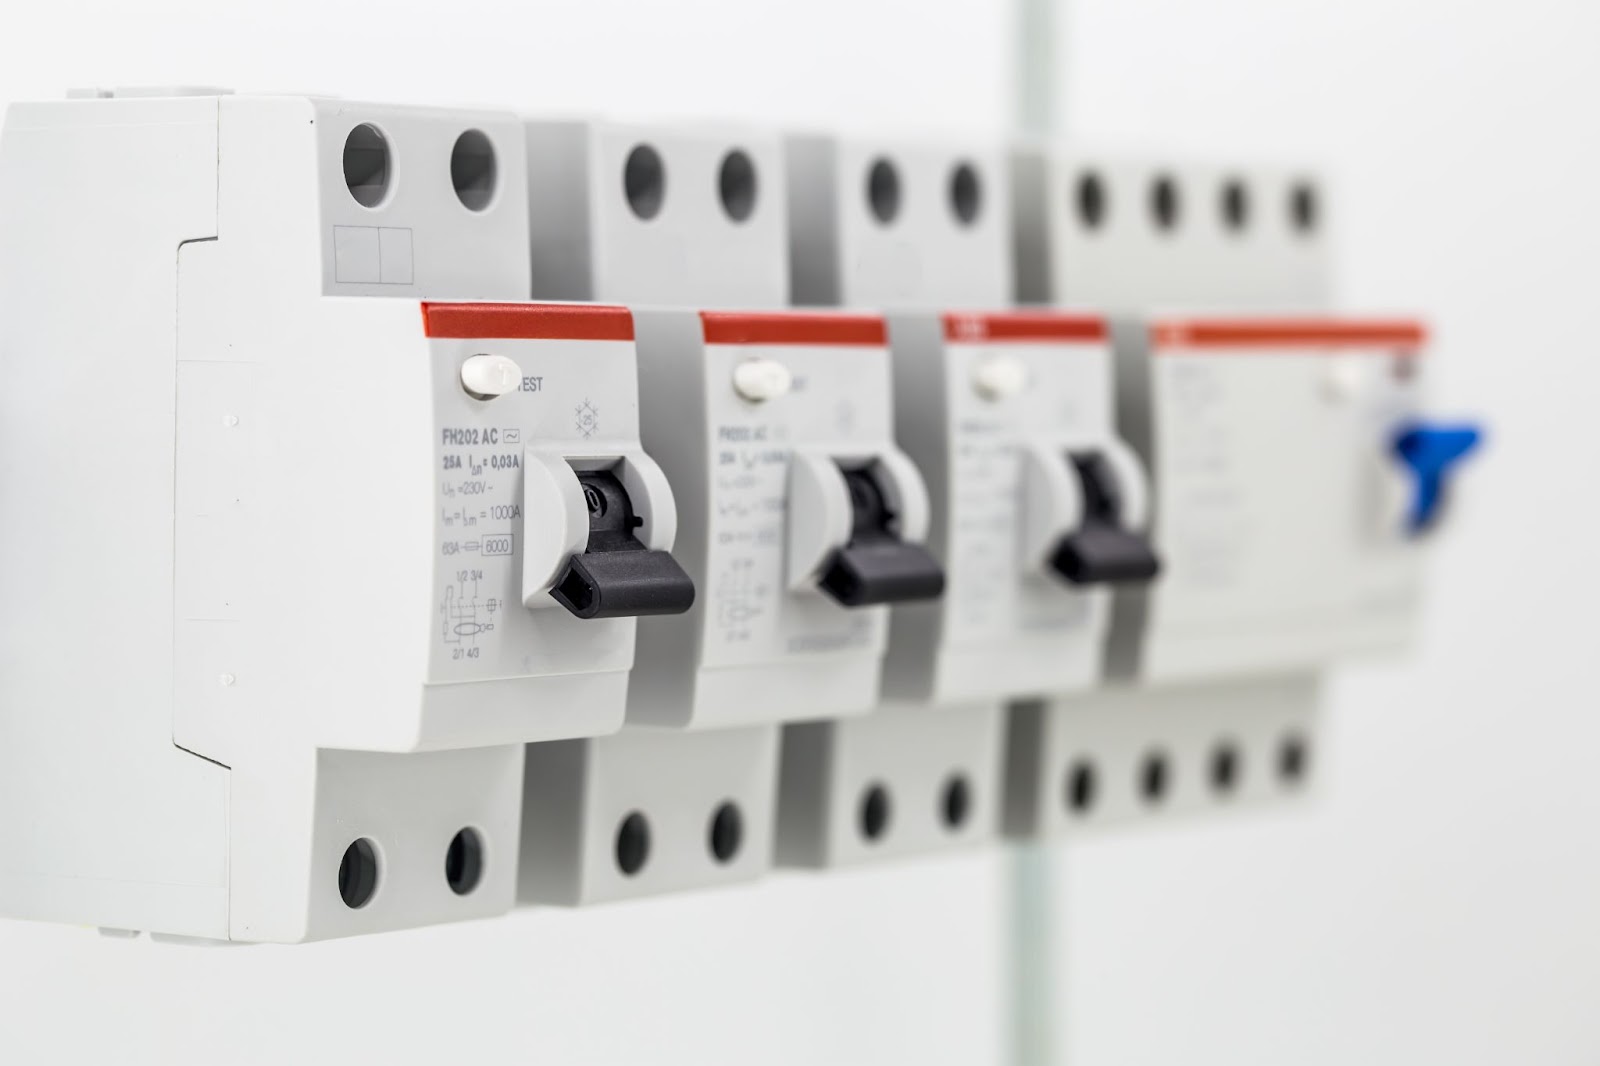 circuit power breakers or electrical switches